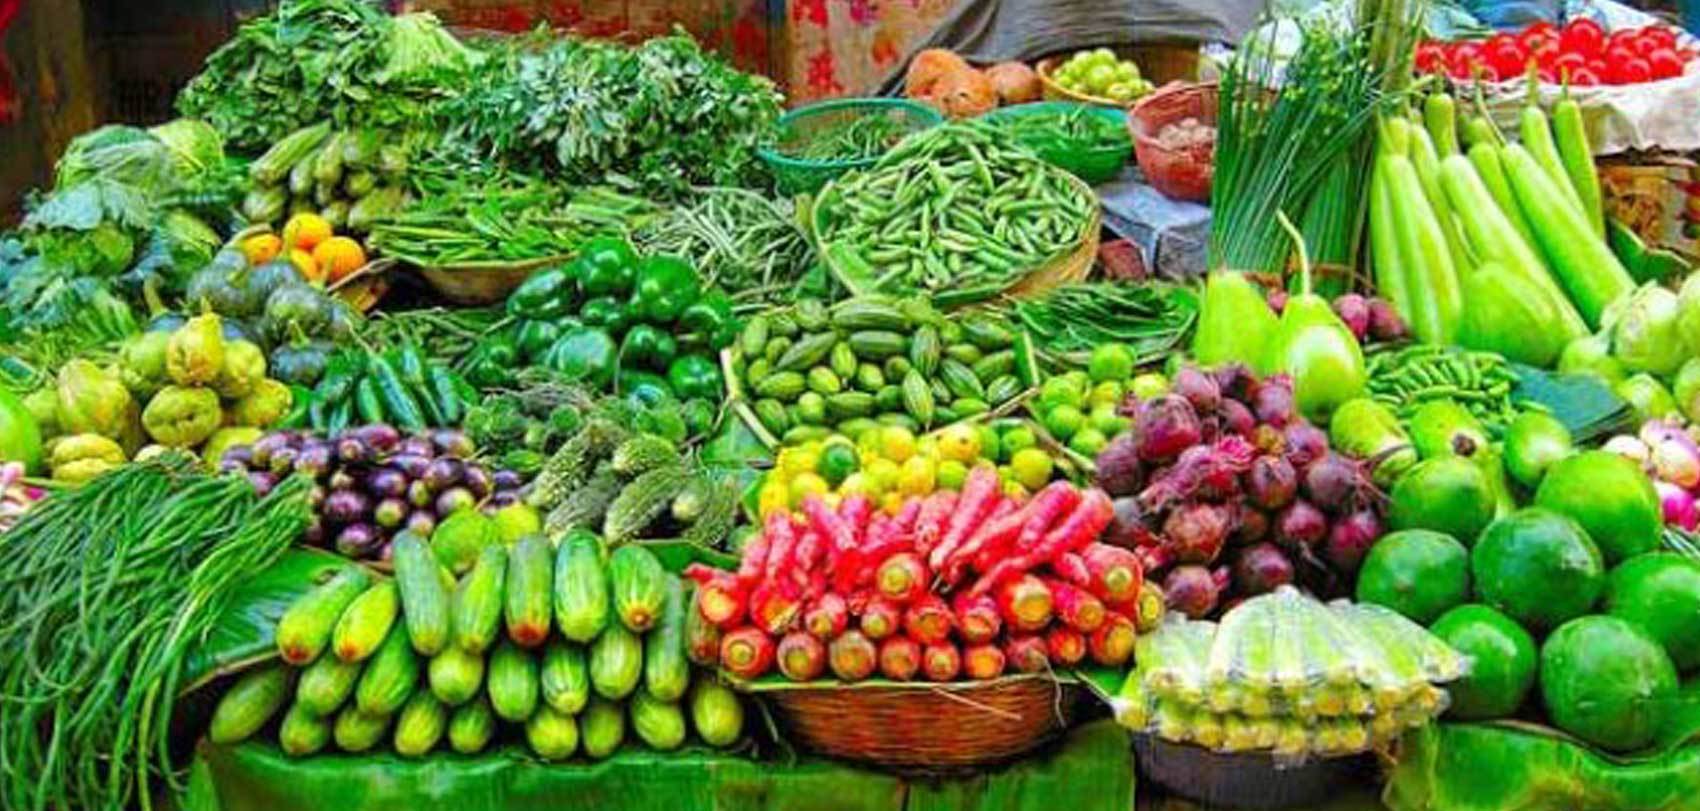 Prices of vegetables and fruits and all agricultural produce